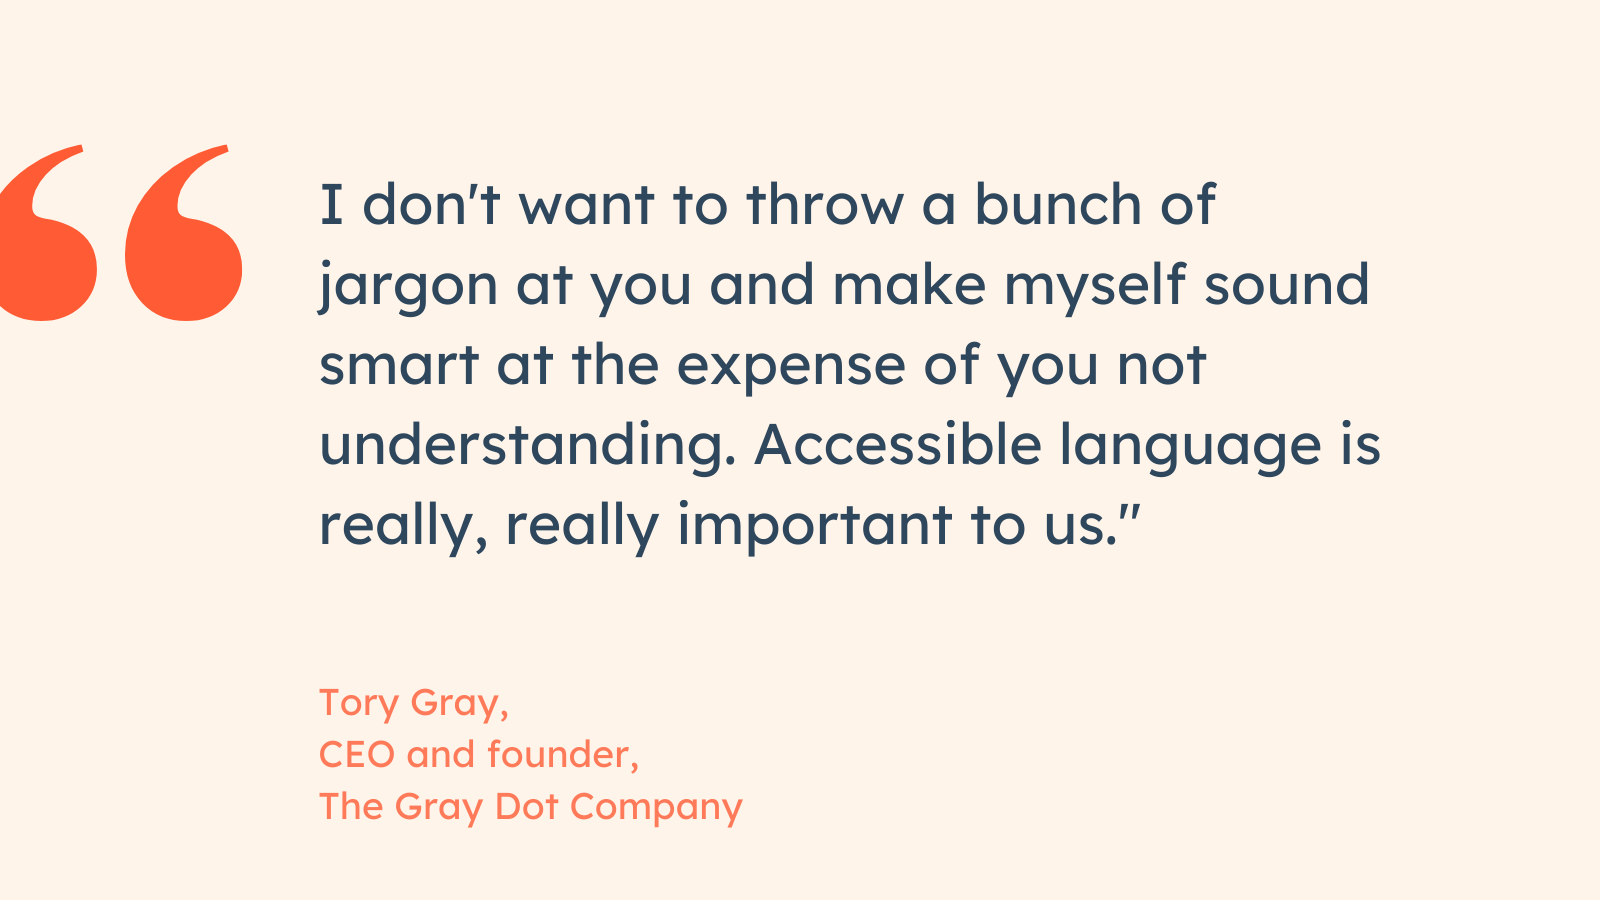 “I don’t want to throw a bunch of jargon at you and make myself sound smart at the expense of you not understanding. Accessible language is really, really important to us.” Tory Gray, CEO and founder, The Gray Dot Company